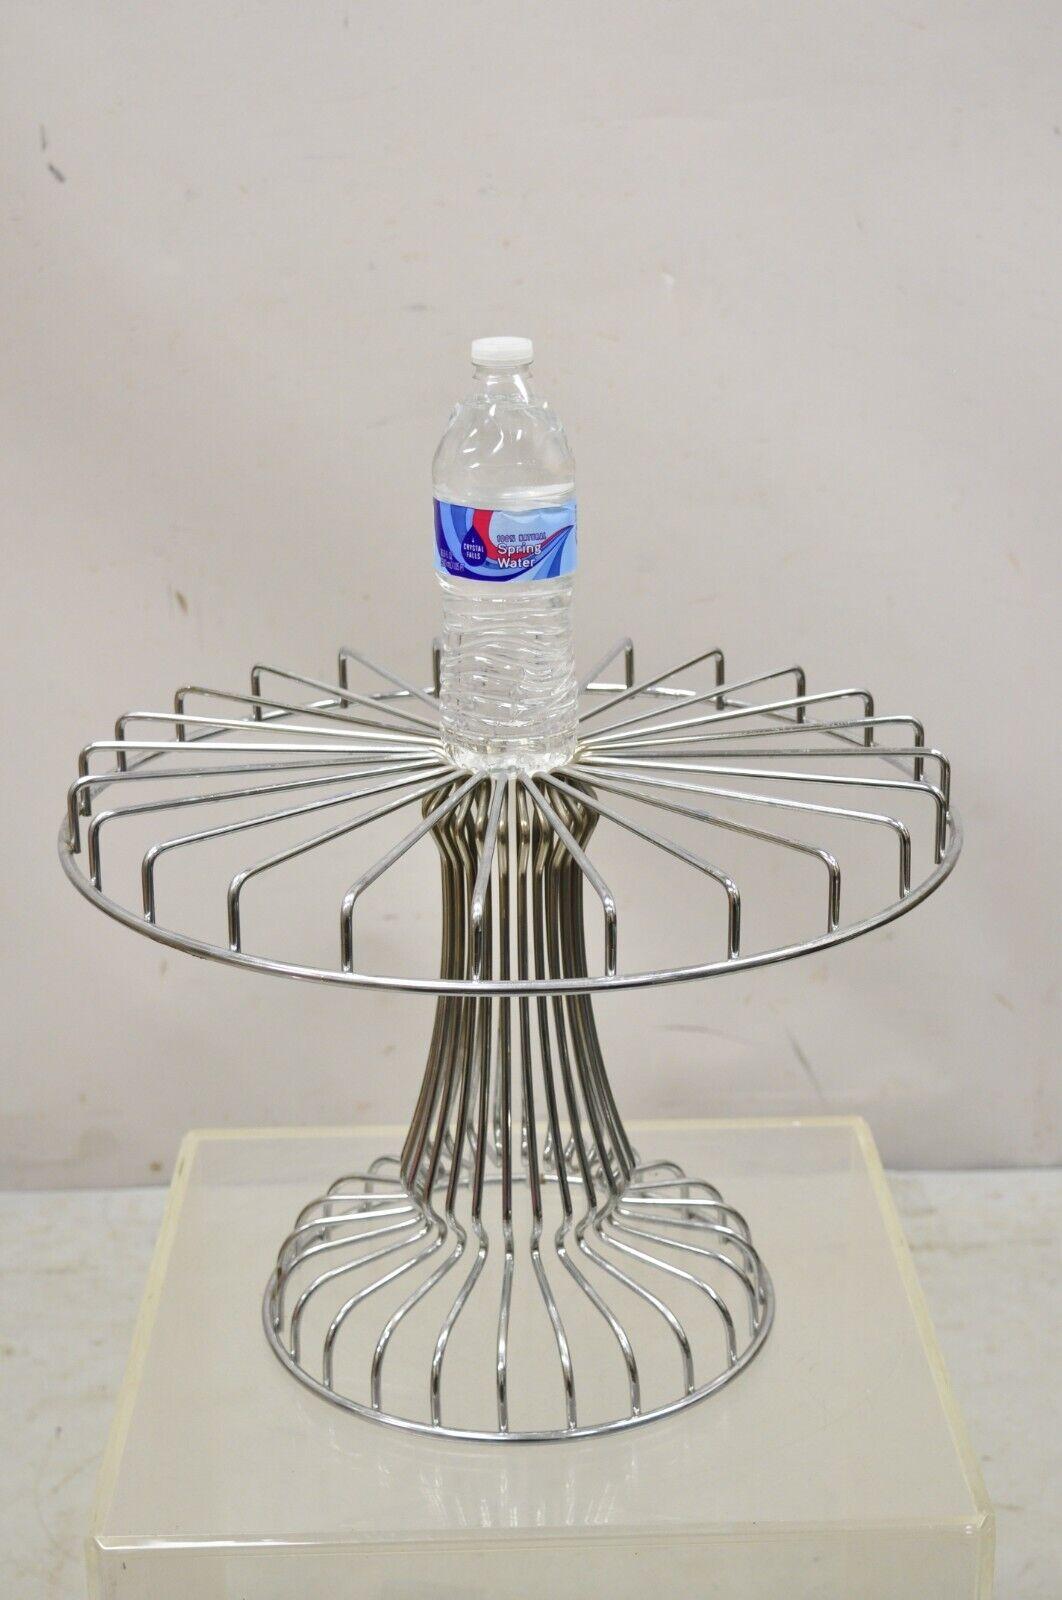 Vintage Mid-Century Modern Chrome Metal Wire Pedestal Cake Stand. Item is similar to the works of Mathieu Mategot, metal frame, clean modernist lines, great style and form. Circa Mid to Late 20th Century. Measurements: 12